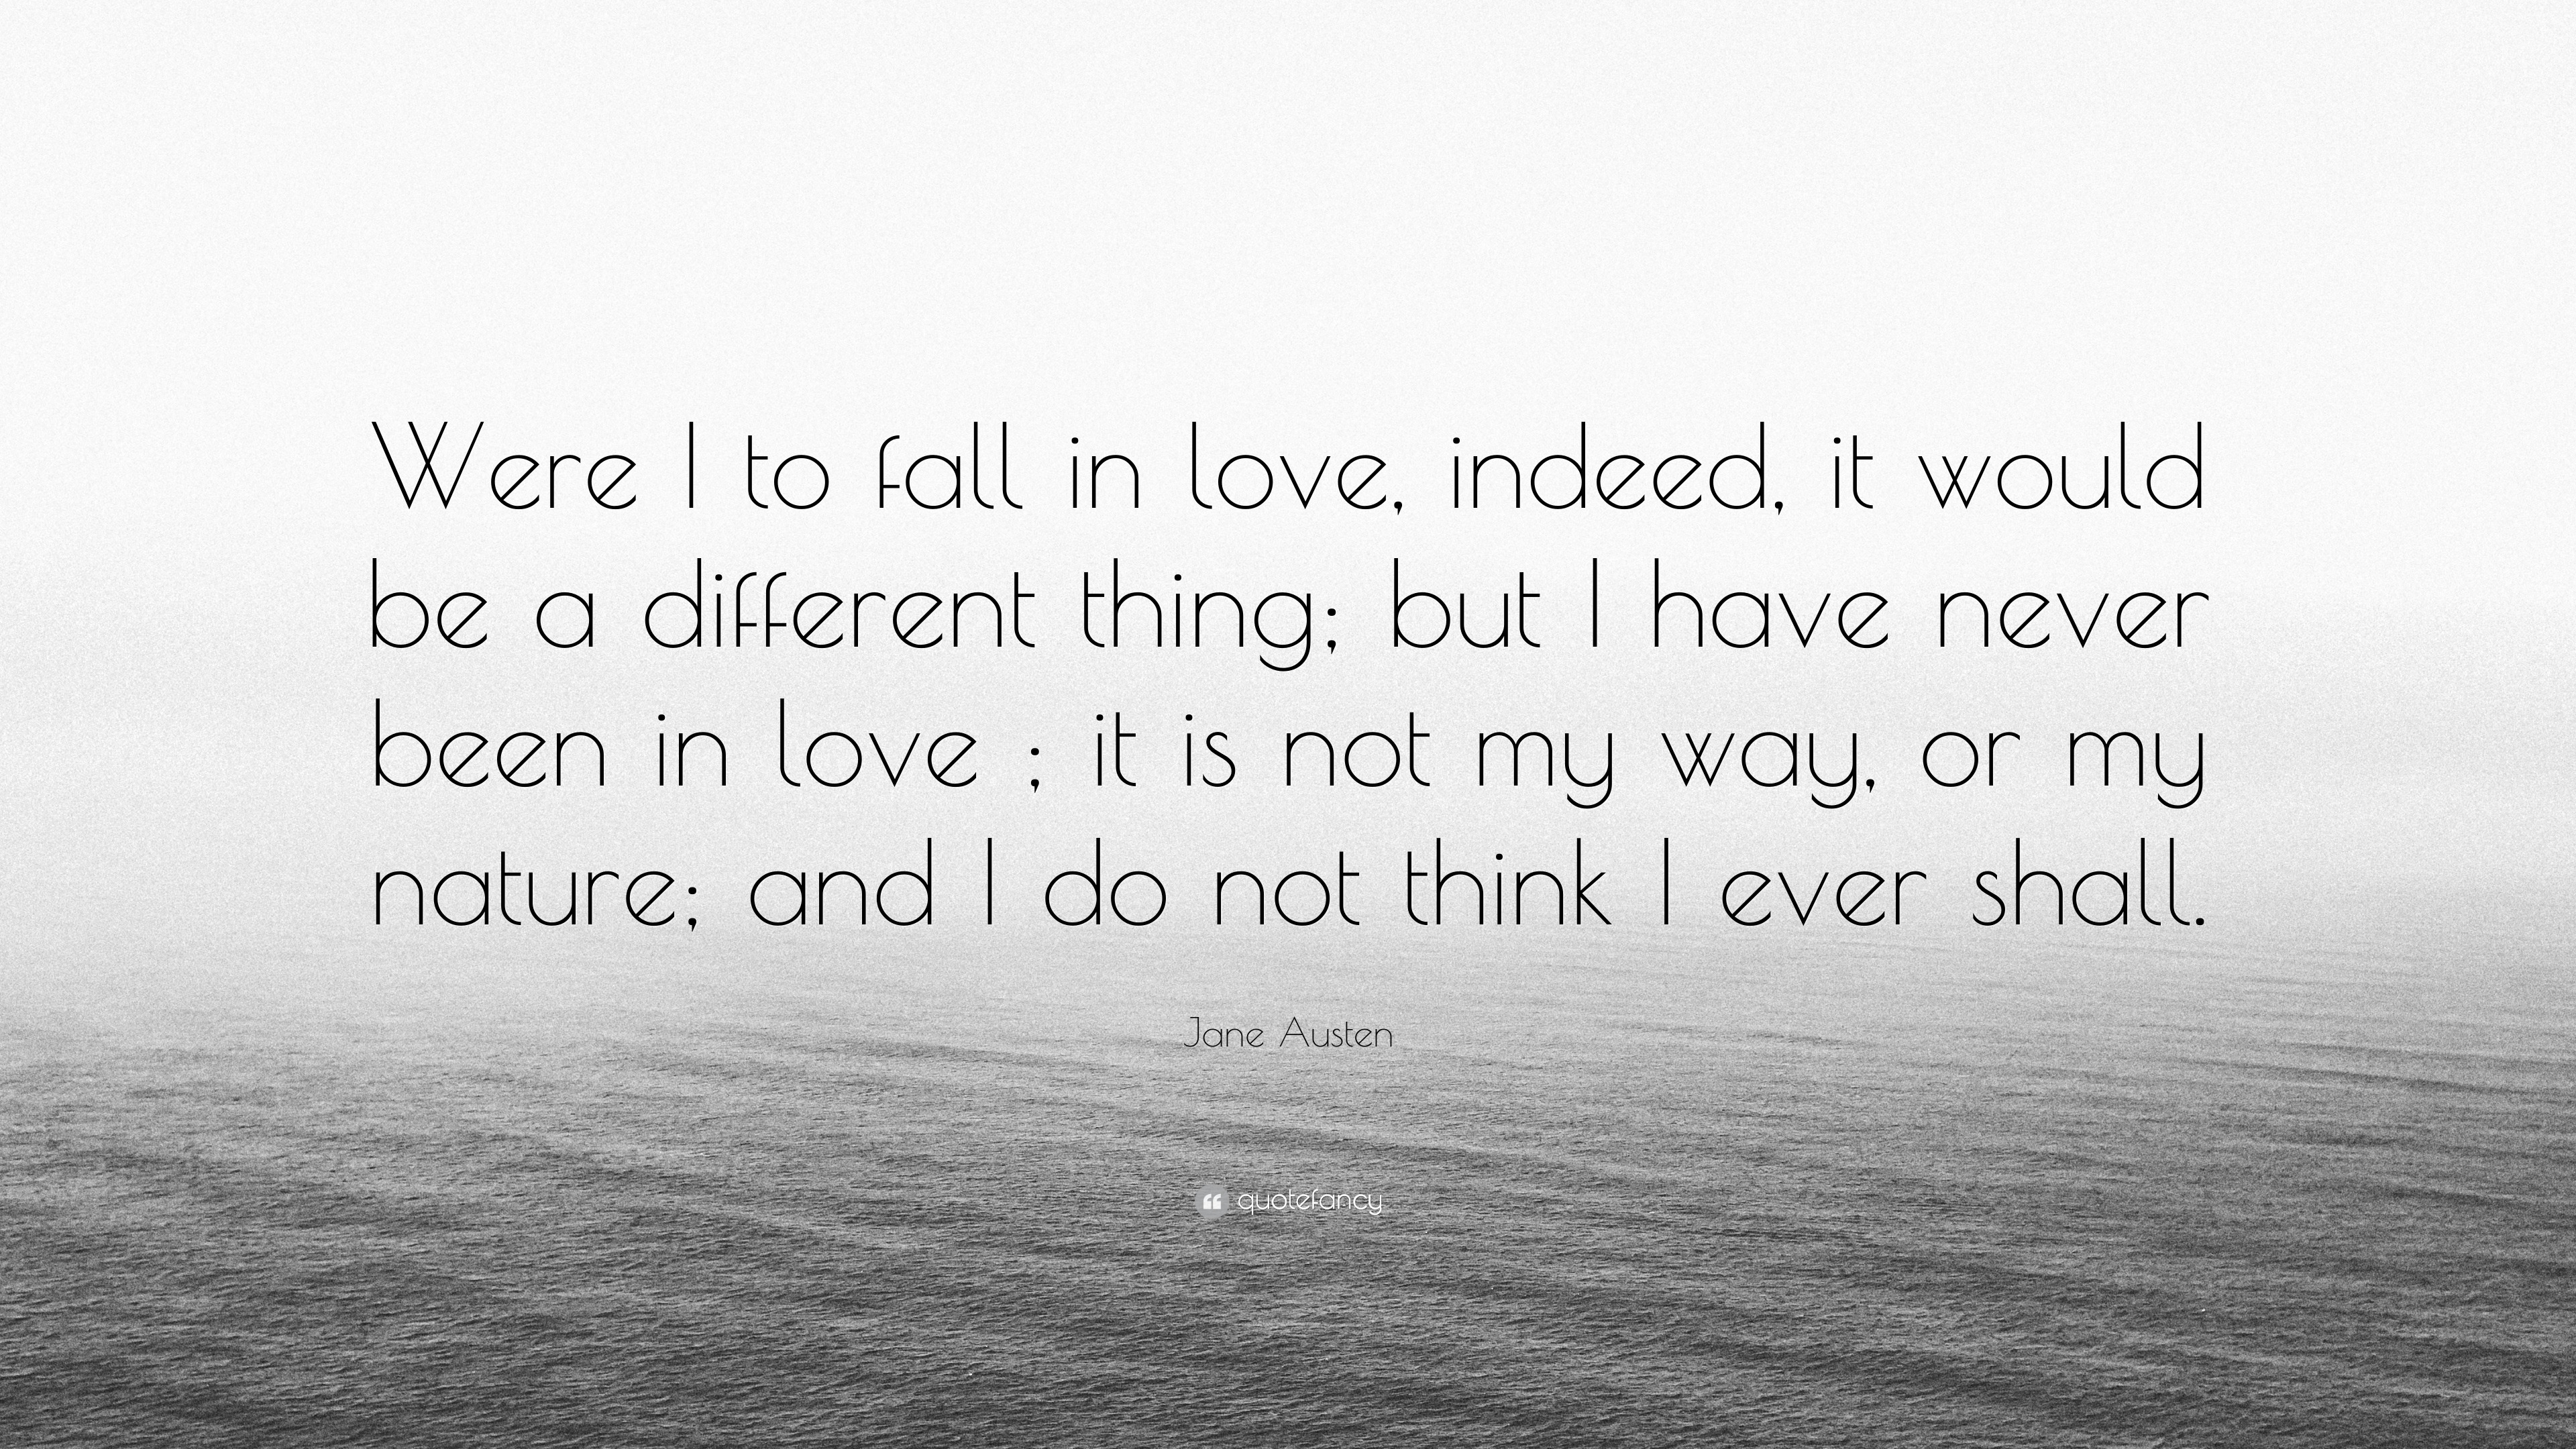 Jane Austen Quote “Were I to fall in love indeed it would